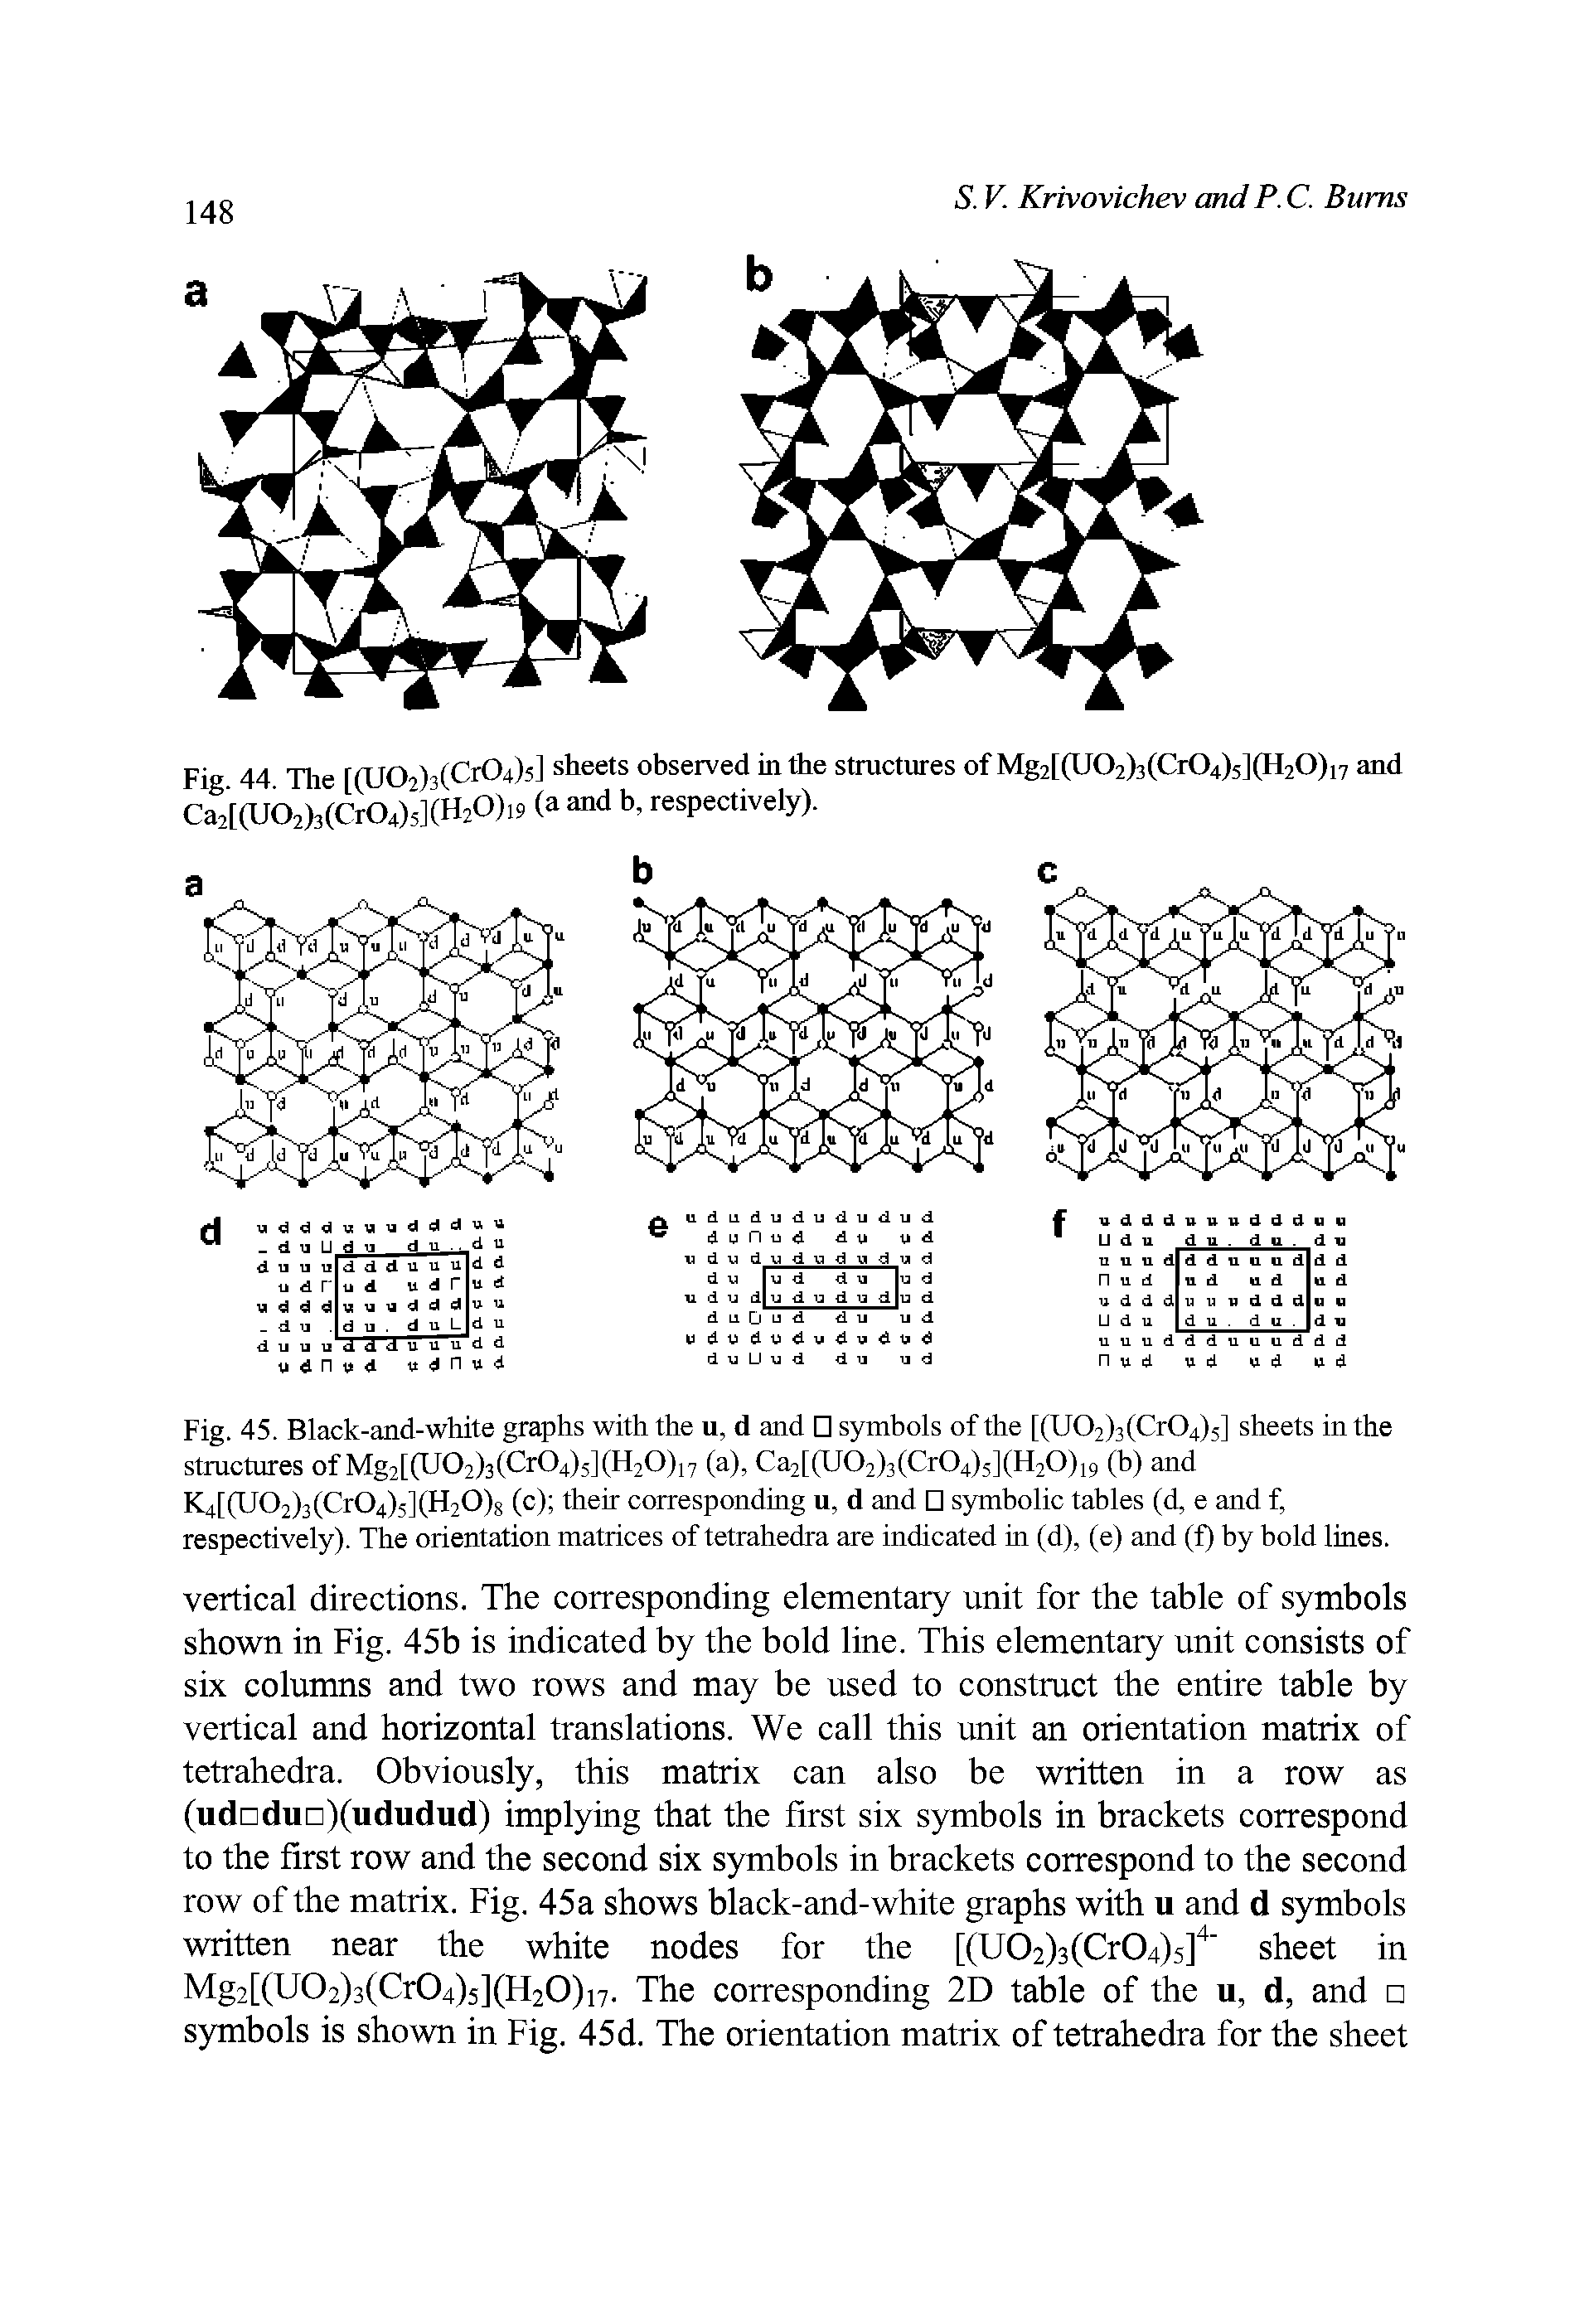 Fig. 45. Black-and-white graphs with the u, d and symbols of the [(U02)3(Cr04)5] sheets in the structures of Mg2[GJ02)3(Cr04)5](H20)i7 (a), Ca2[(U02)3(Cr04)5](H20)i9 (b) and K4[(U02)3(Cr04)5](H20)8 (c) their corresponding u, d and symbolic tables (d, e and f, respectively). The orientation matrices of tetrahedra are indicated in (d), (e) and (f) by bold lines.